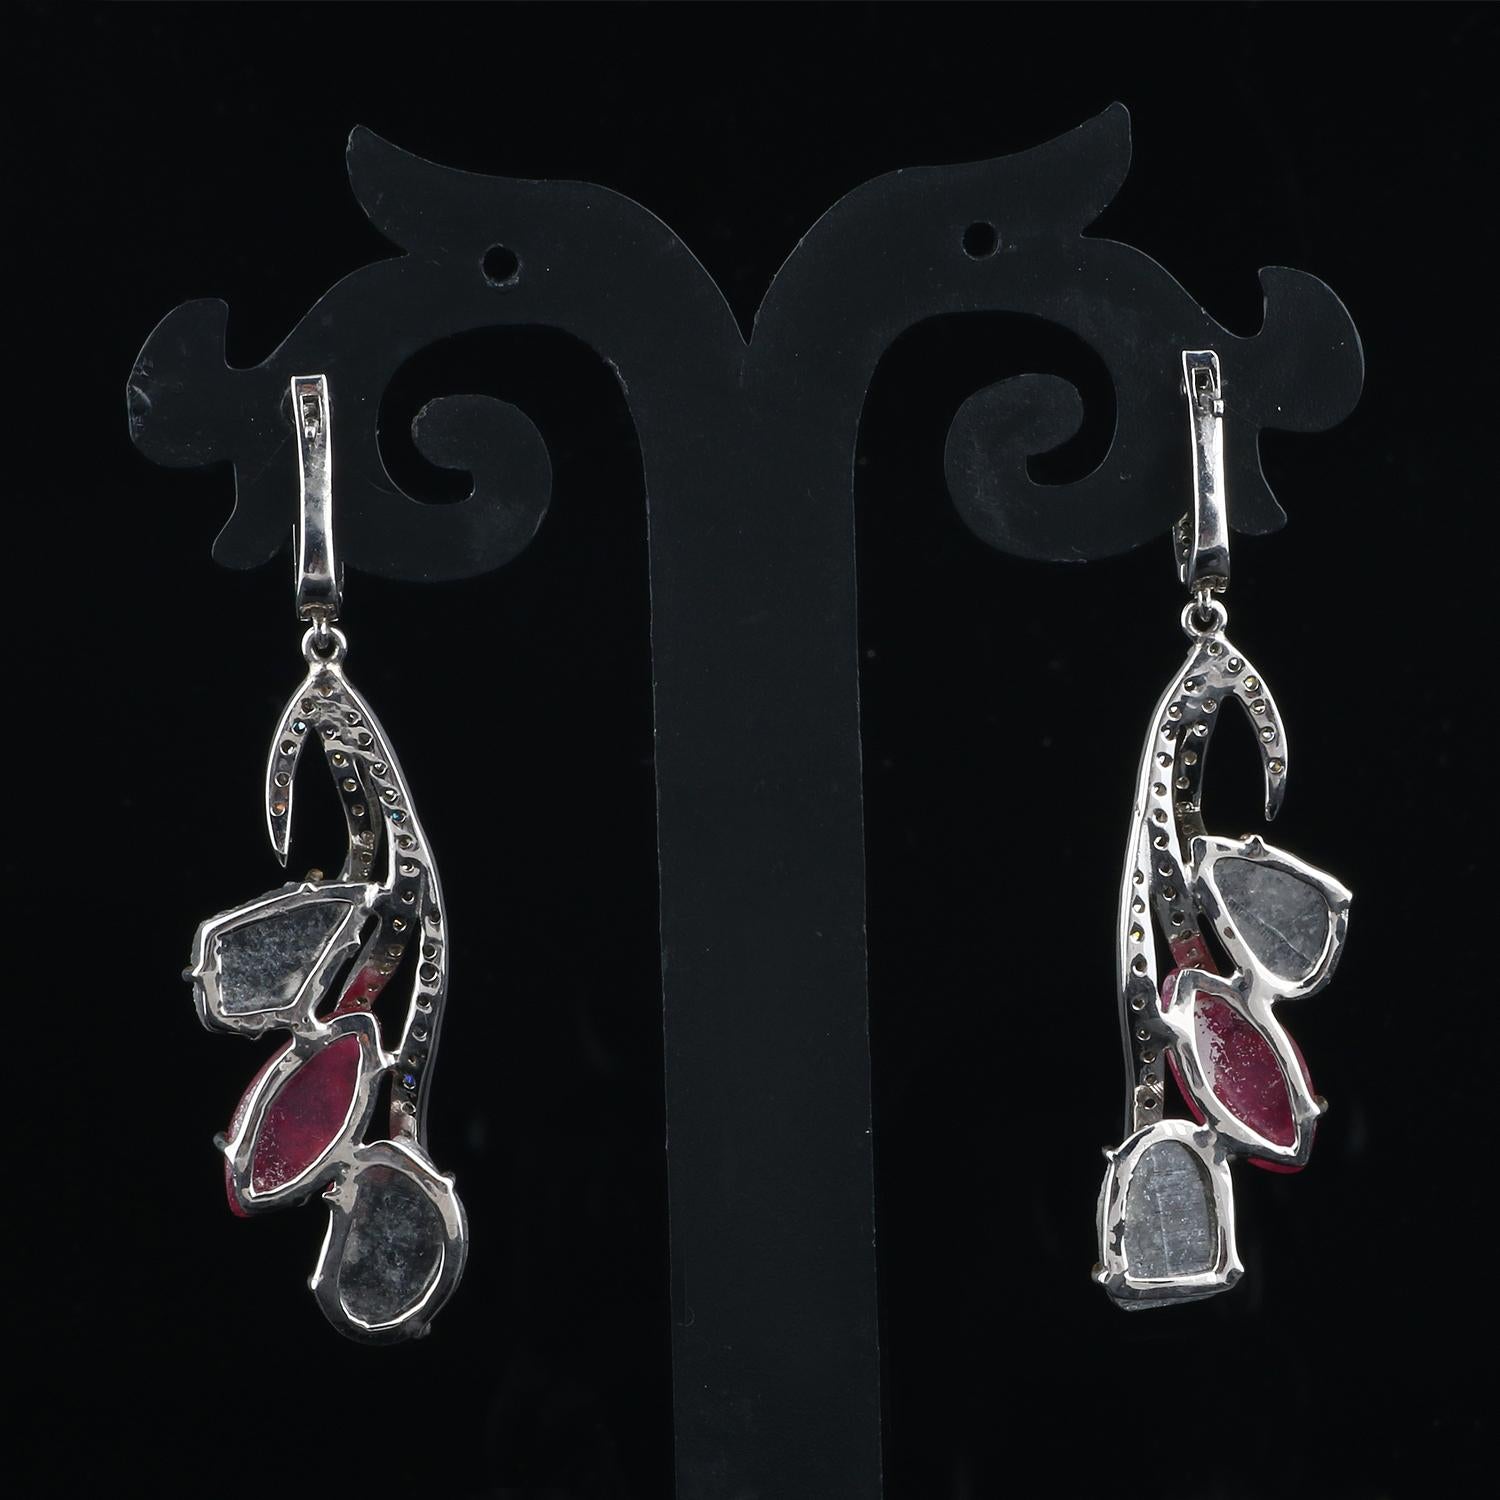 Round Cut Antique Pink Tourmaline Silver Earrings, Victorian Style Diamond Dangle Earrings For Sale